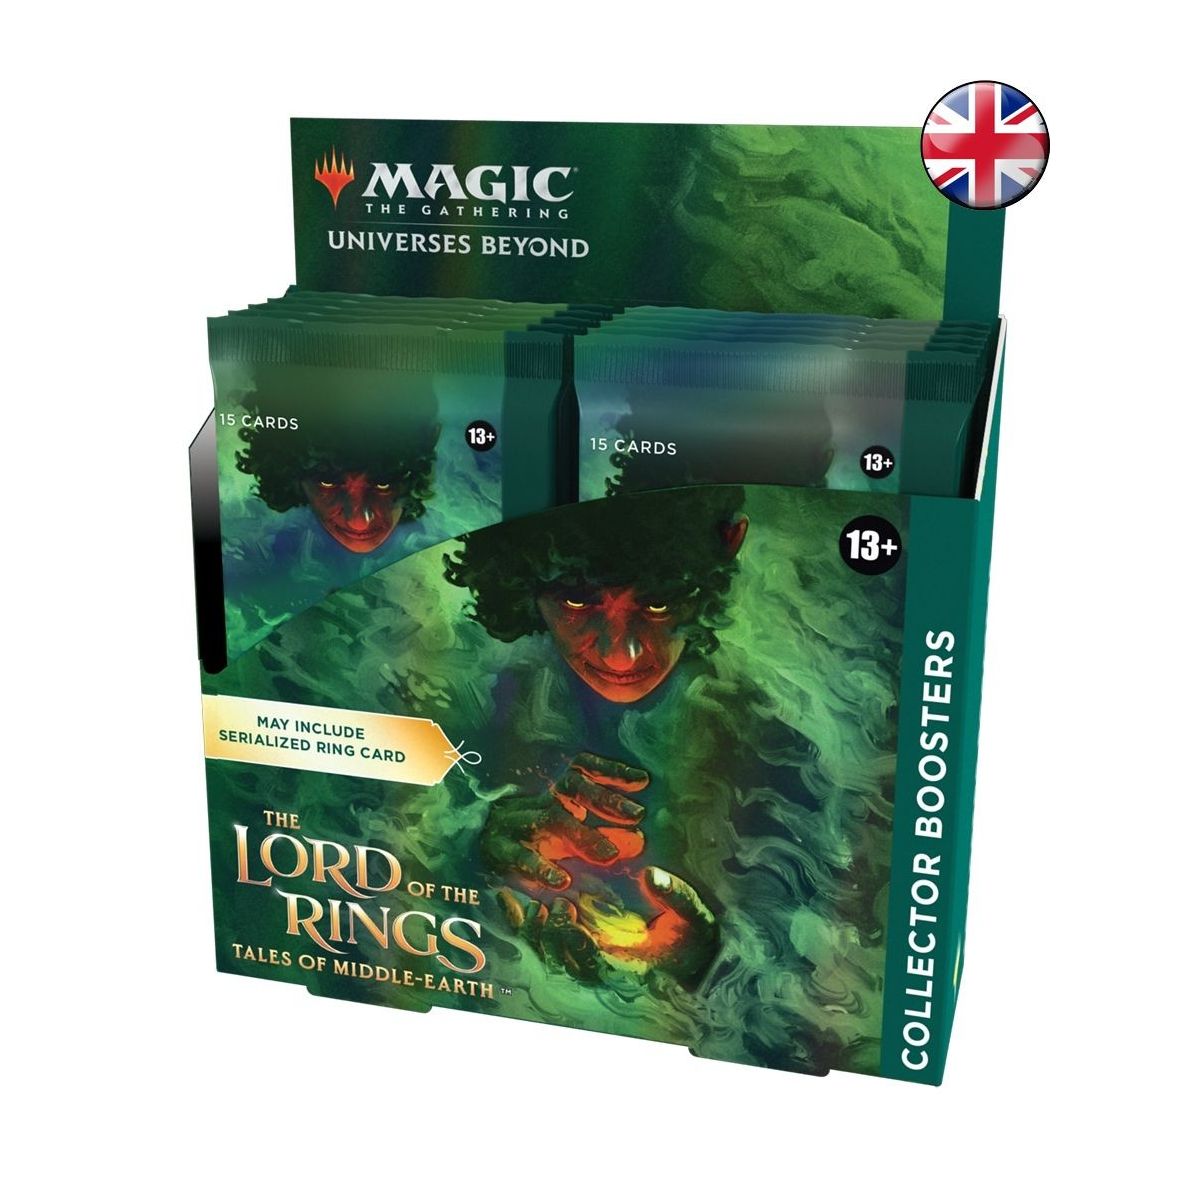 Item Magic The Gathering - Booster Box - Collector - The Lord of the Rings: Chronicles of Middle-earth - EN